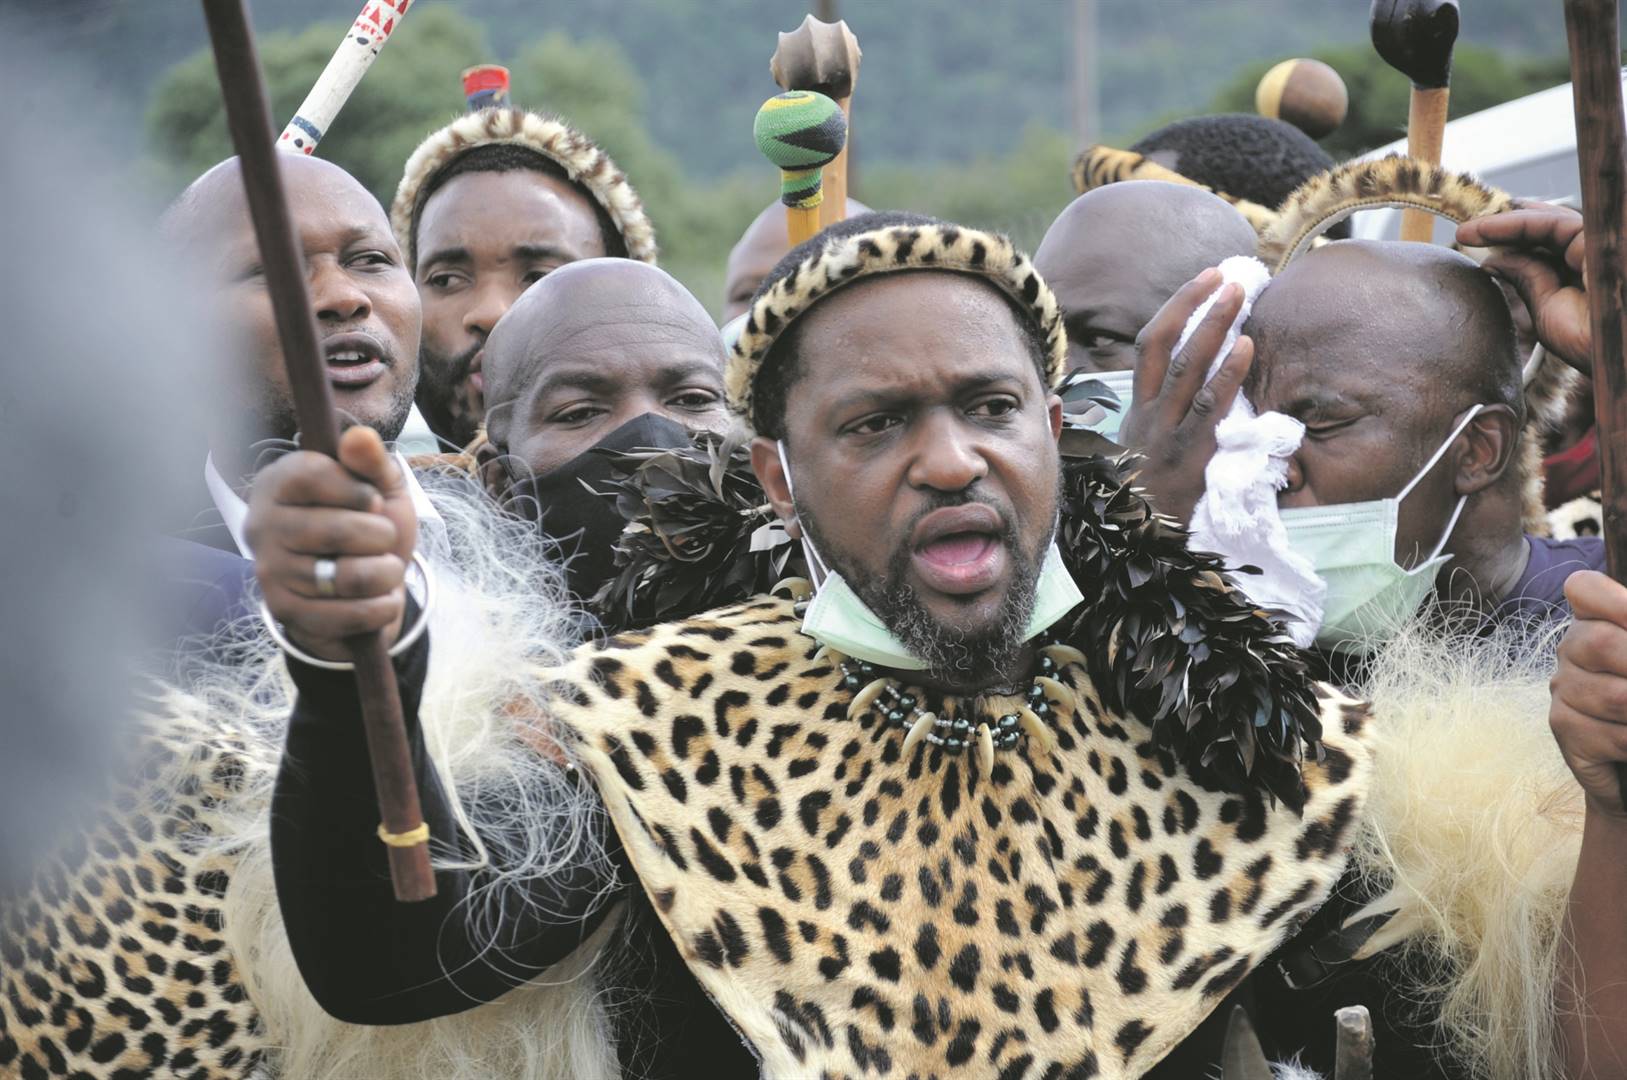 The Ingonyama Trust in which Zulu monarch King Misuzulu is a sole trustee has withdrawn its appeal and conceded defeat in a landmark case that ensures that customary land remains in the hands of ordinary people.